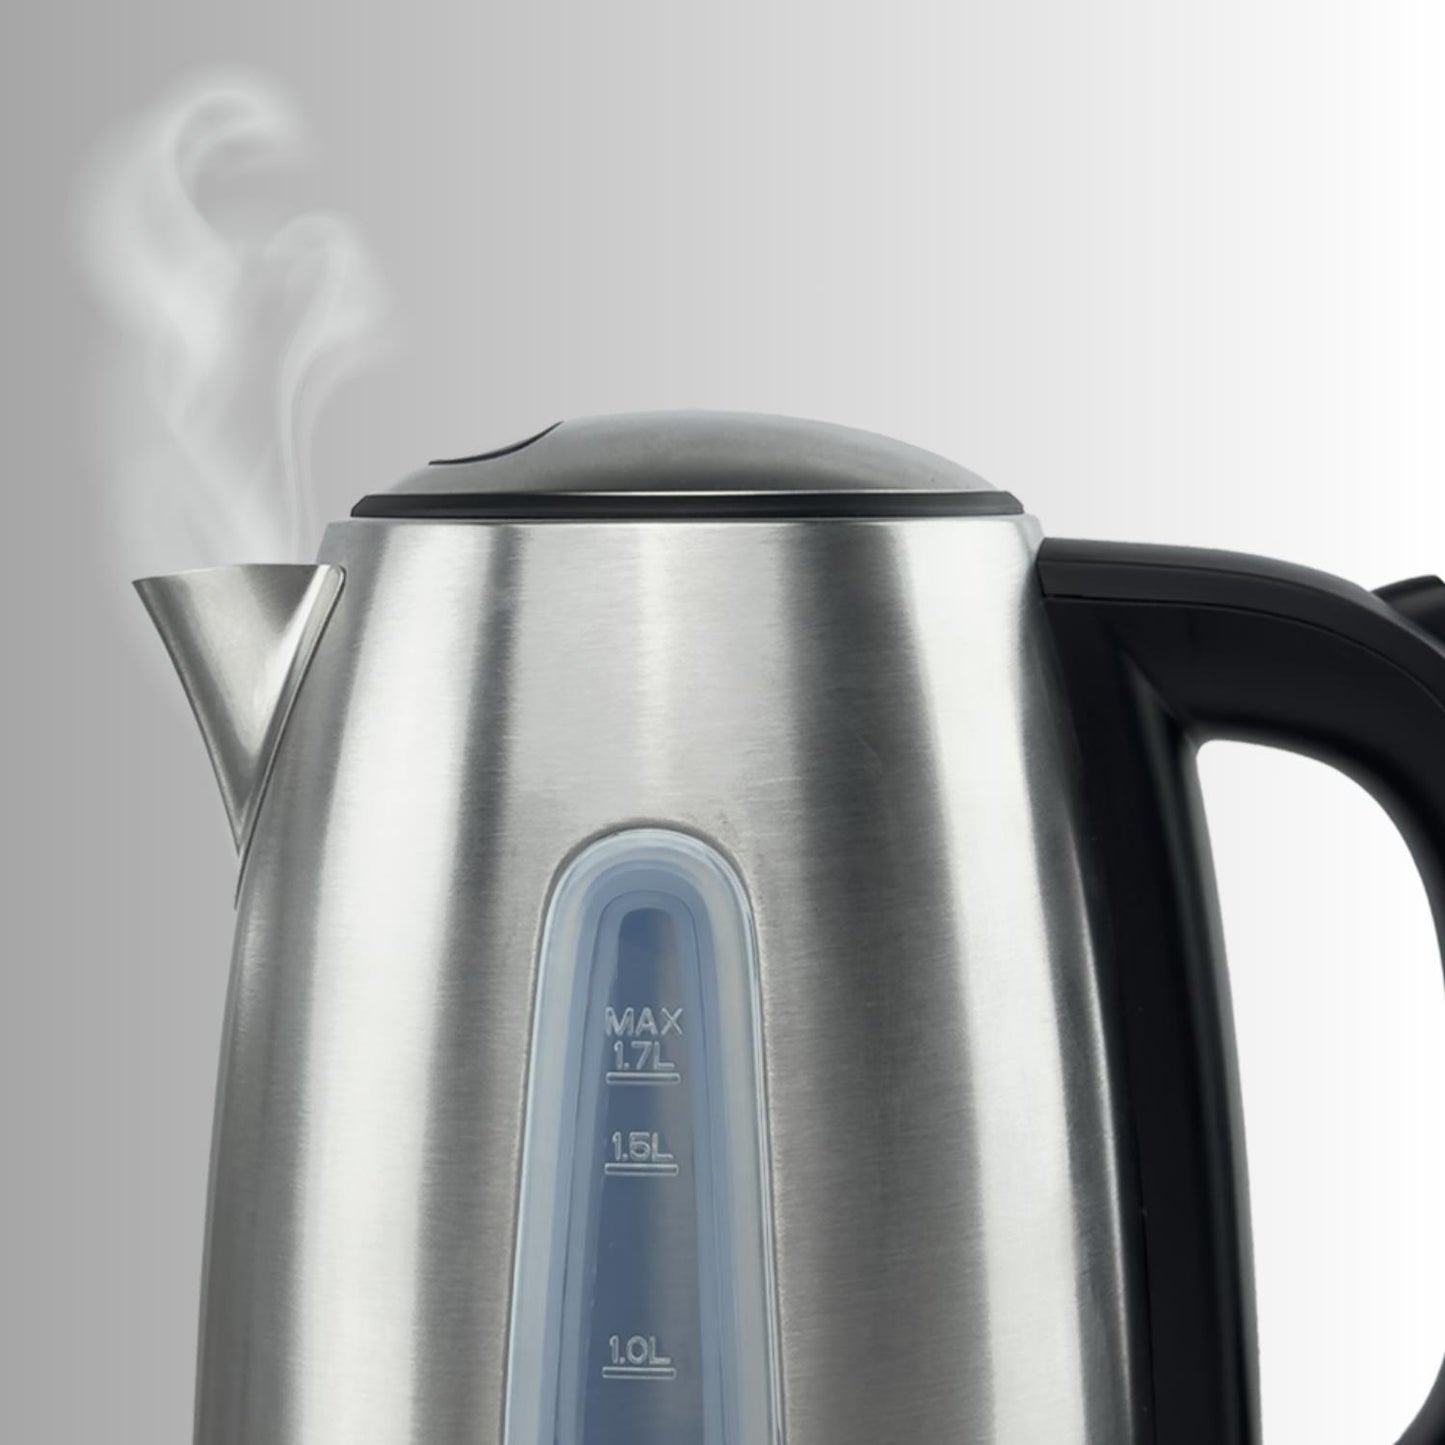 Hamilton Beach Rise 1.7L Brushed Stainless Steel Kettle